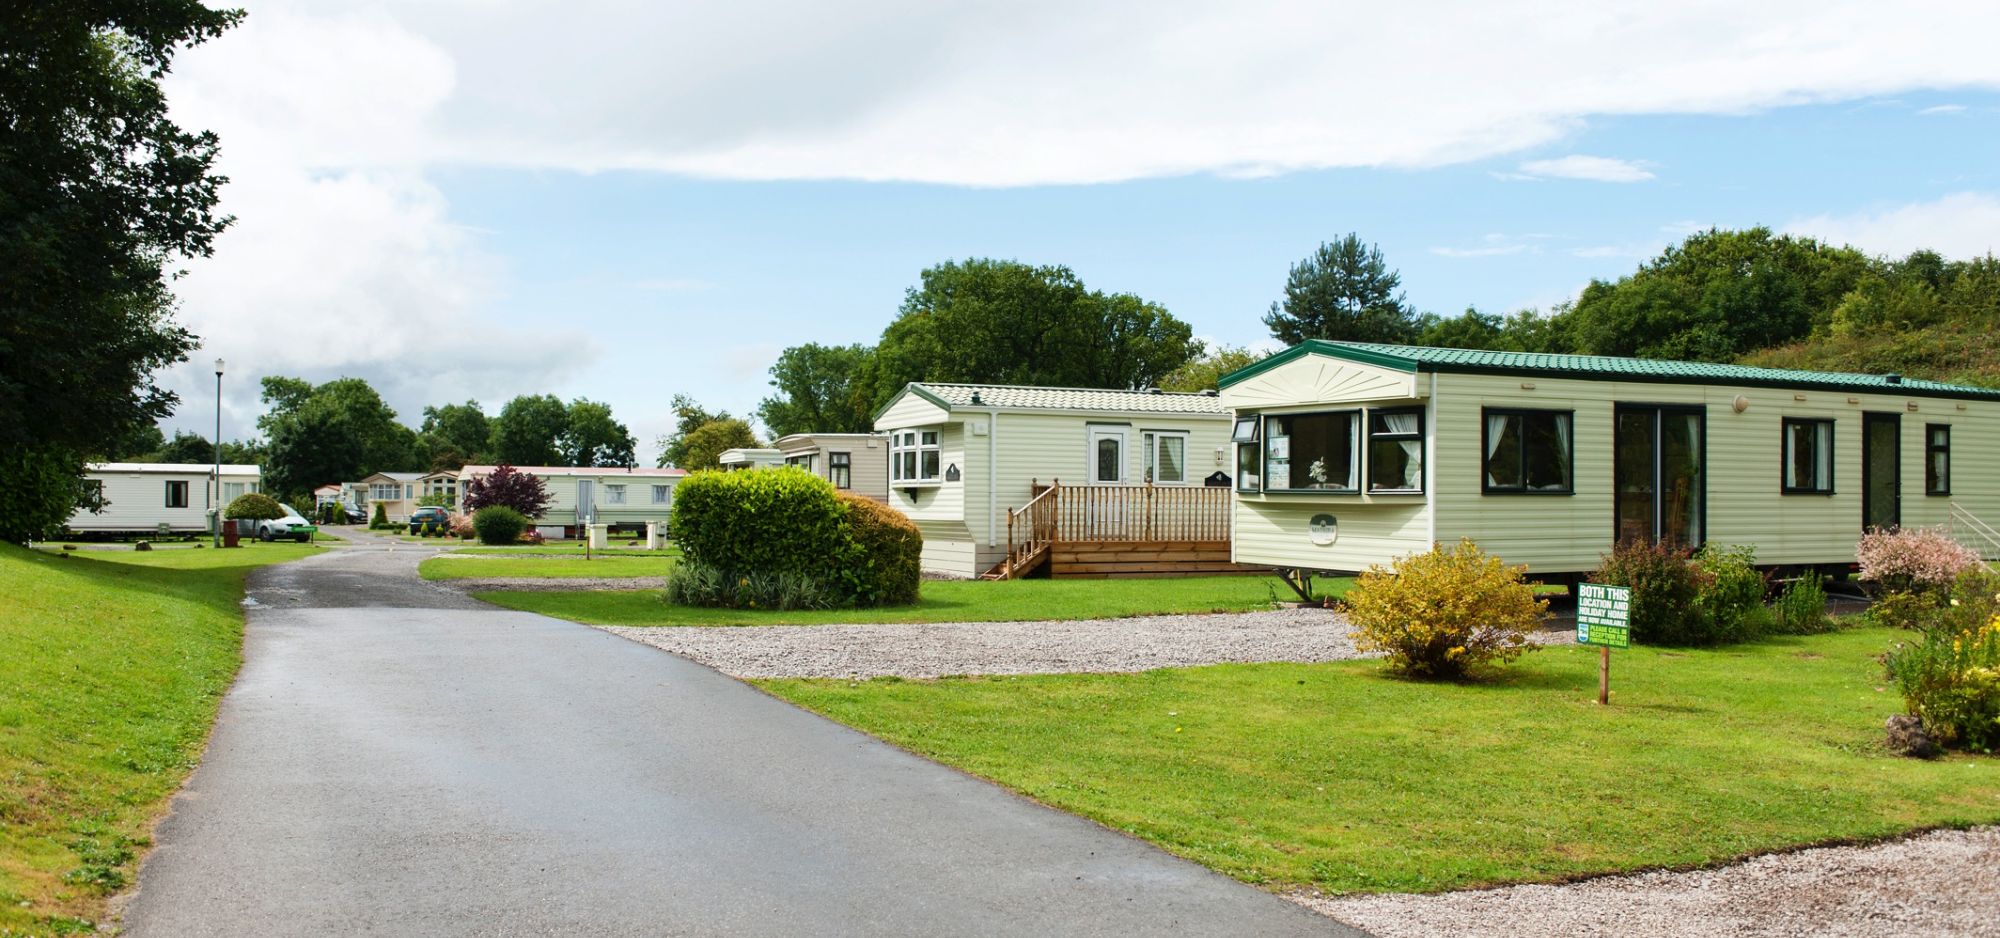 Holiday parks in north wales